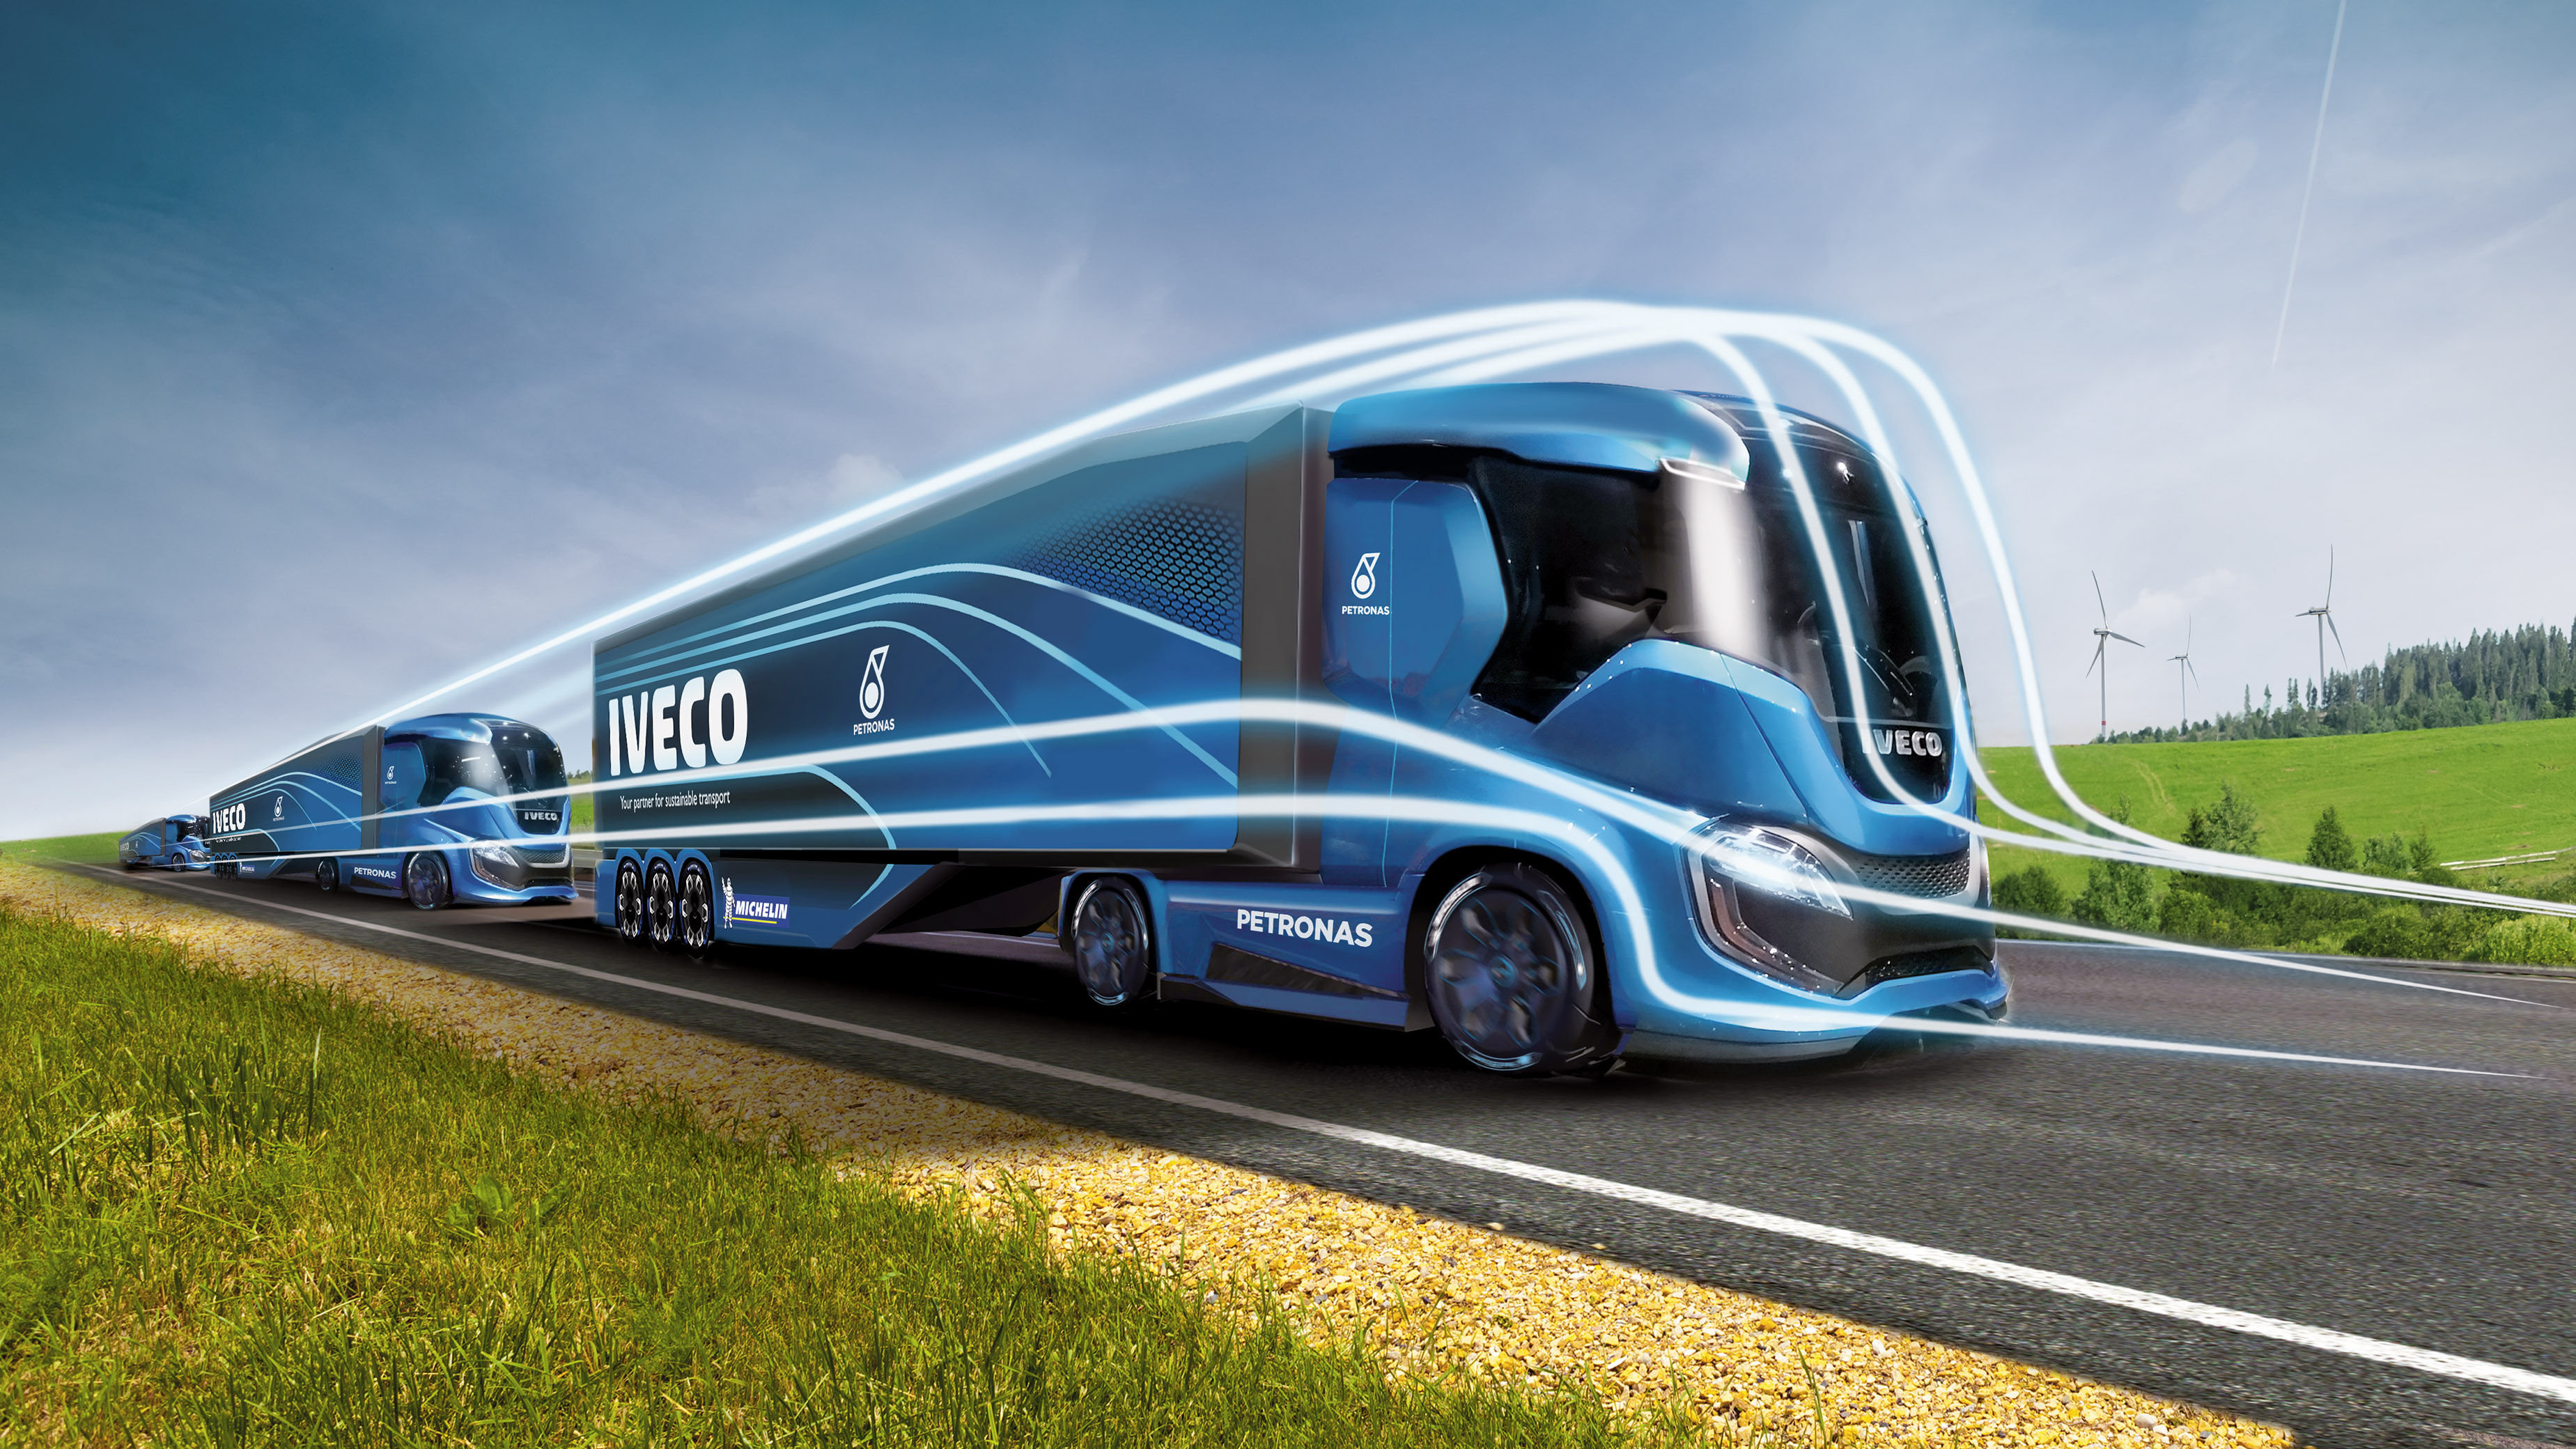 Iveco, a CNH Industrial brand, presents its Z TRUCK at the 2016 IAA Show in Hannover, Germany 